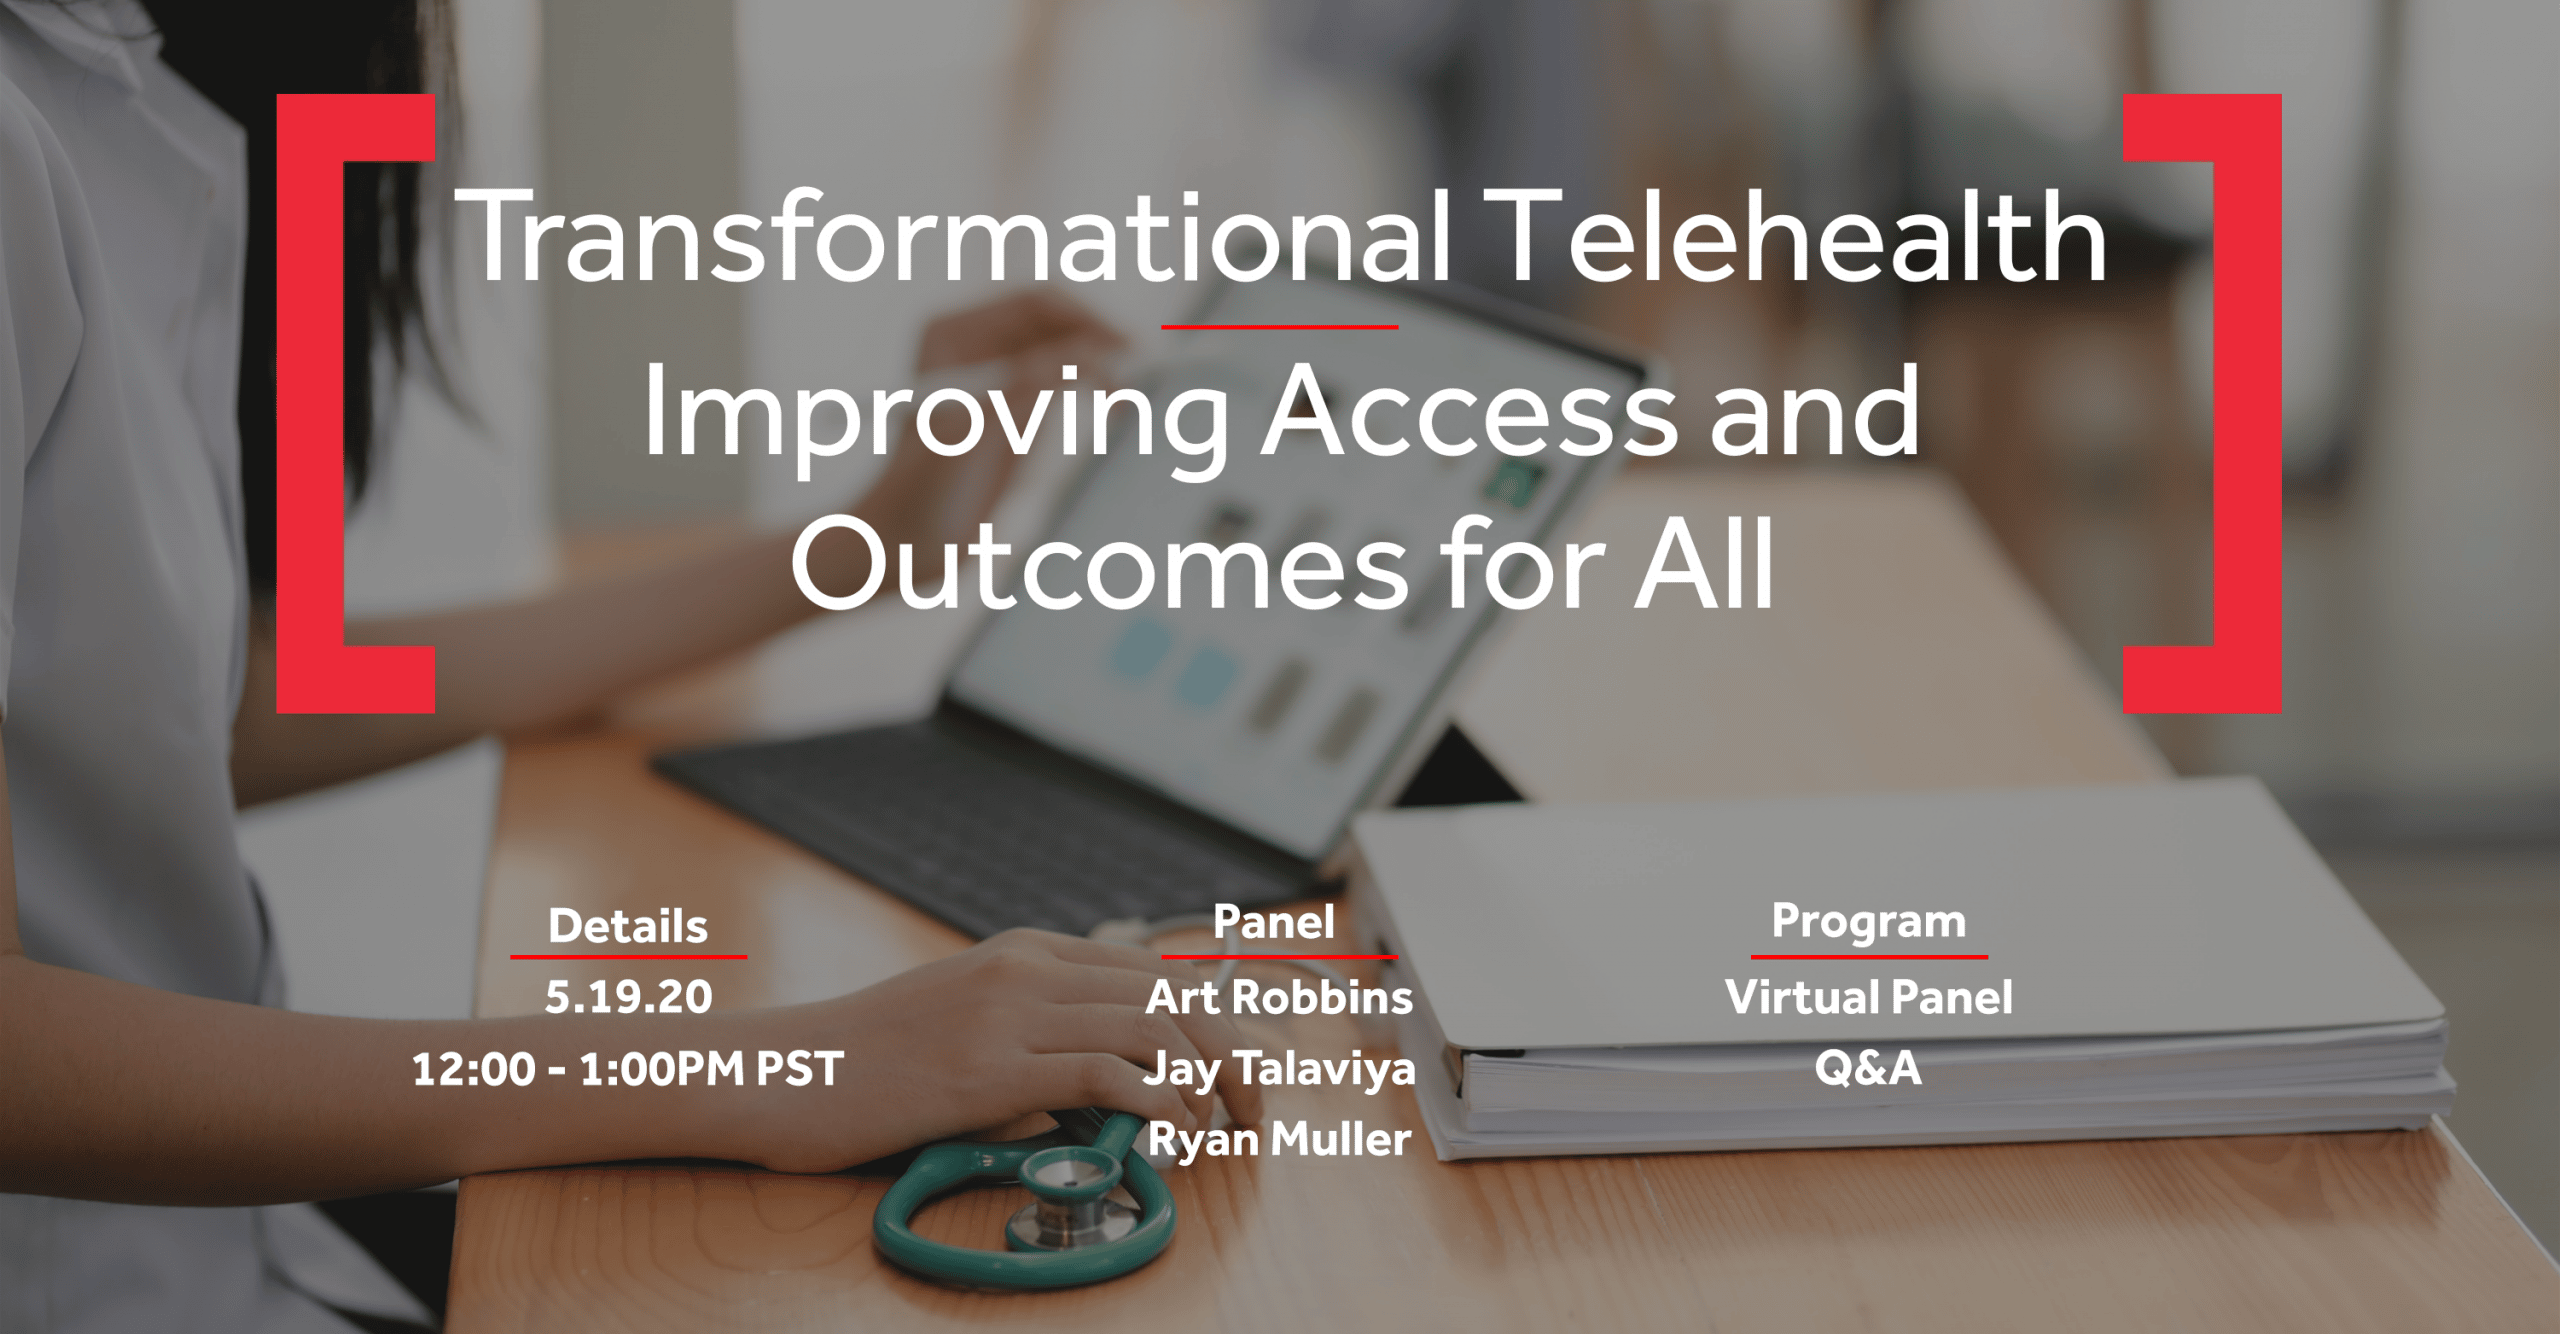 Transformational Telehealth - Improving Access and Outcomes for All